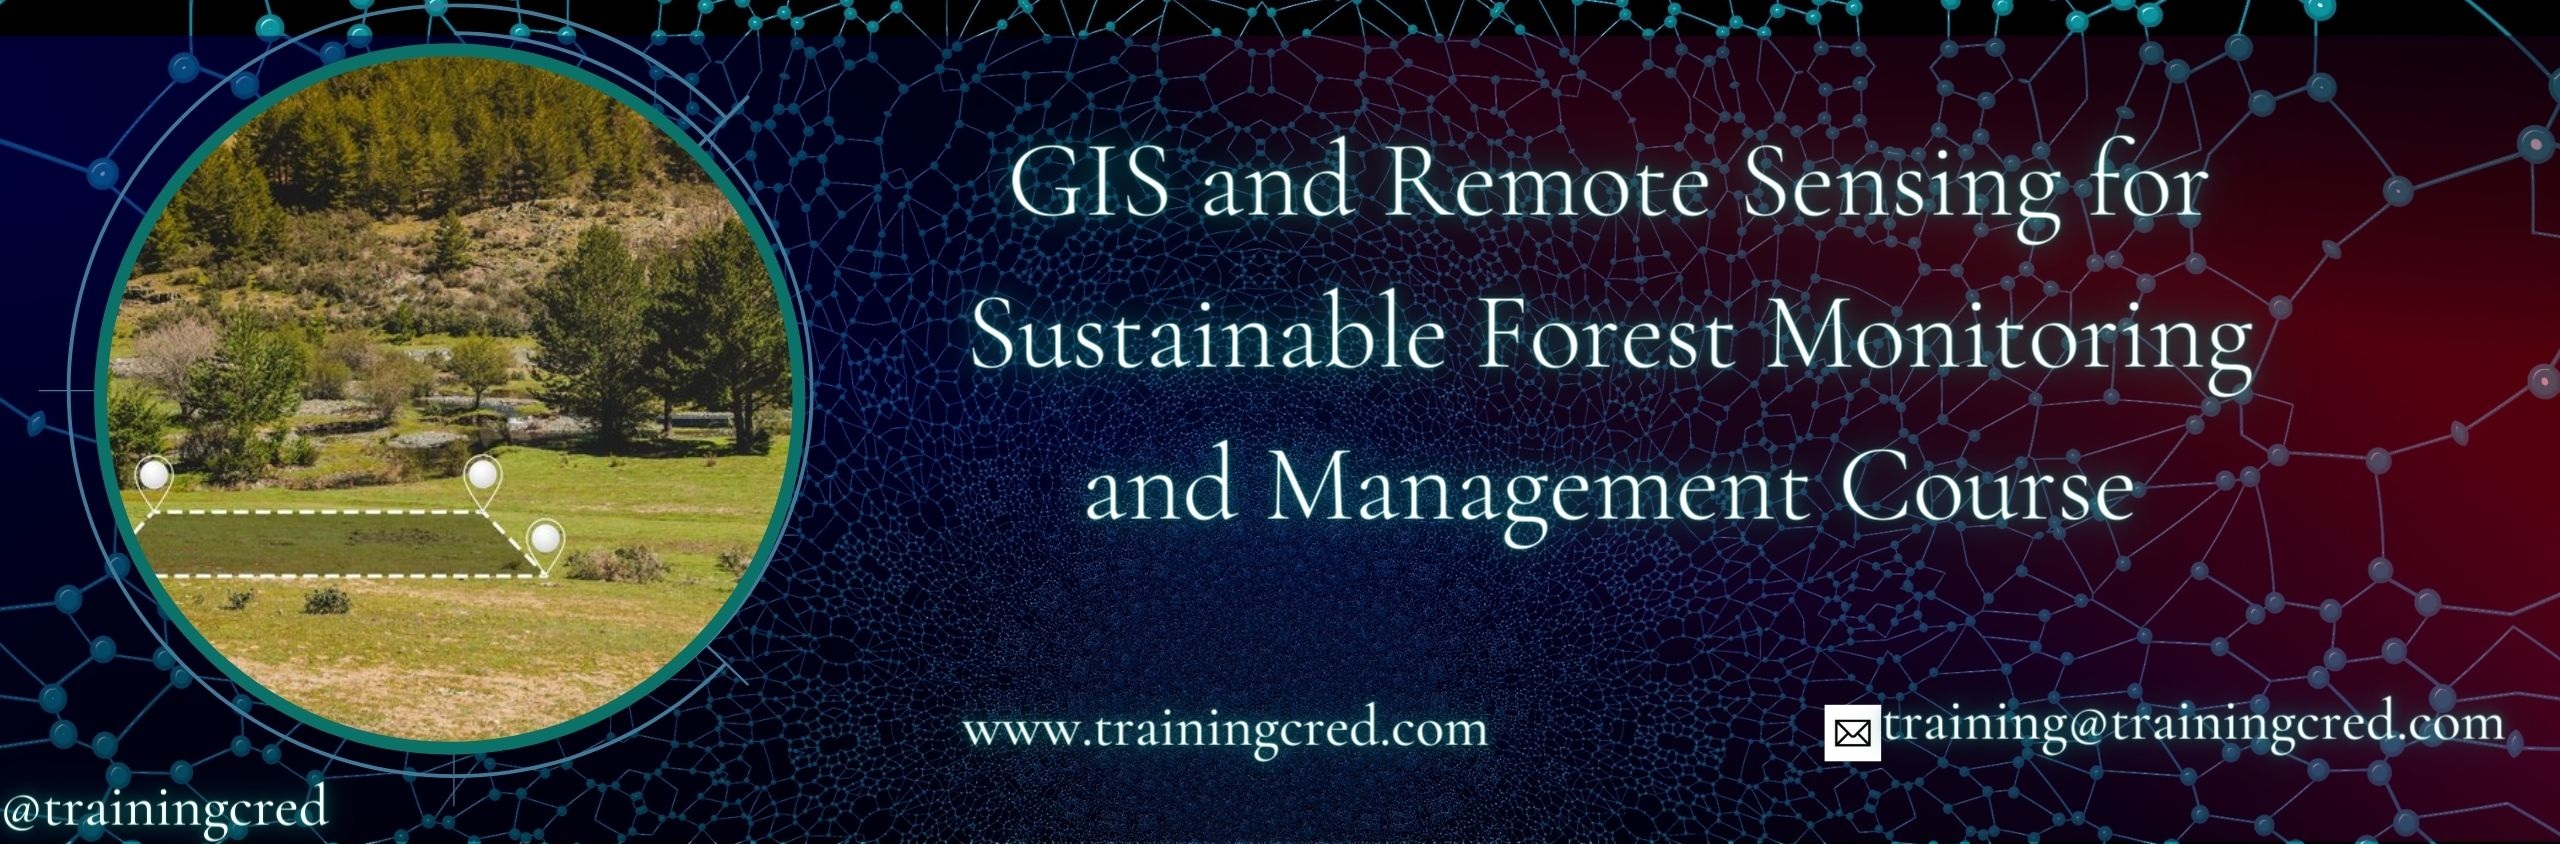 GIS and Remote Sensing for Sustainable Forest Monitoring and Management Training